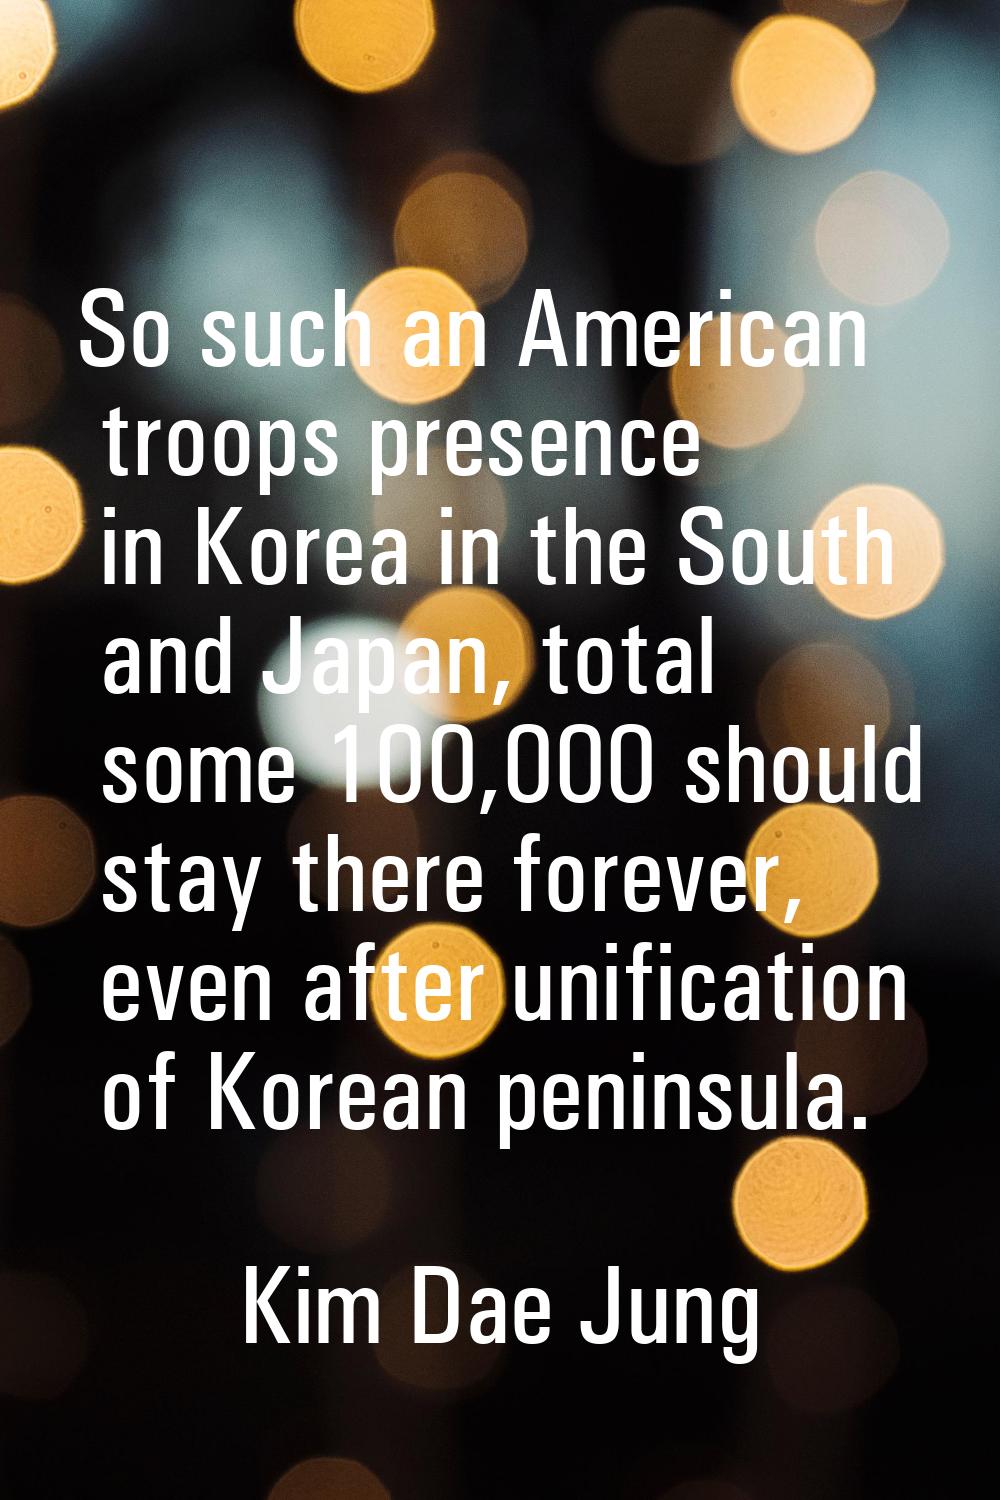 So such an American troops presence in Korea in the South and Japan, total some 100,000 should stay